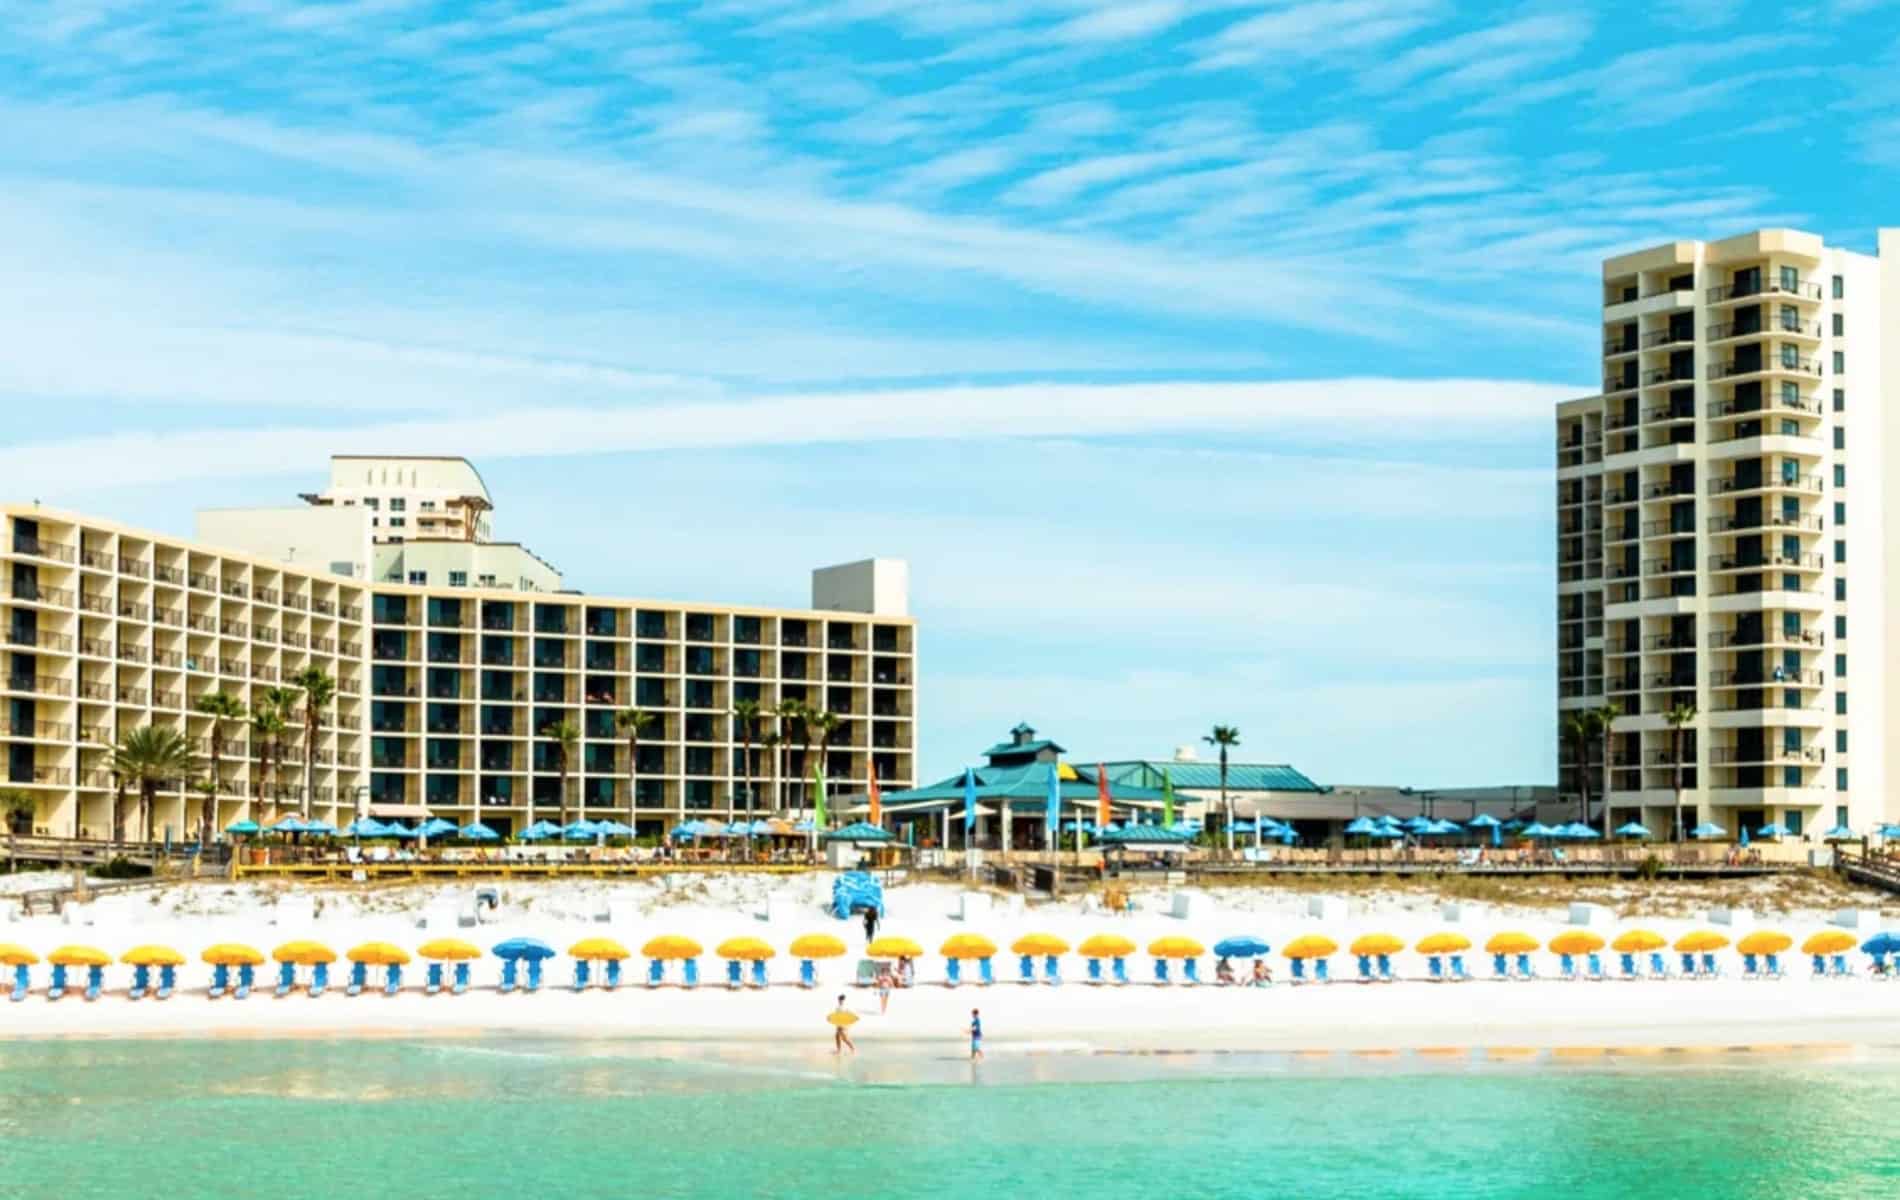 New General Manager Appointed at Hilton Sandestin Beach